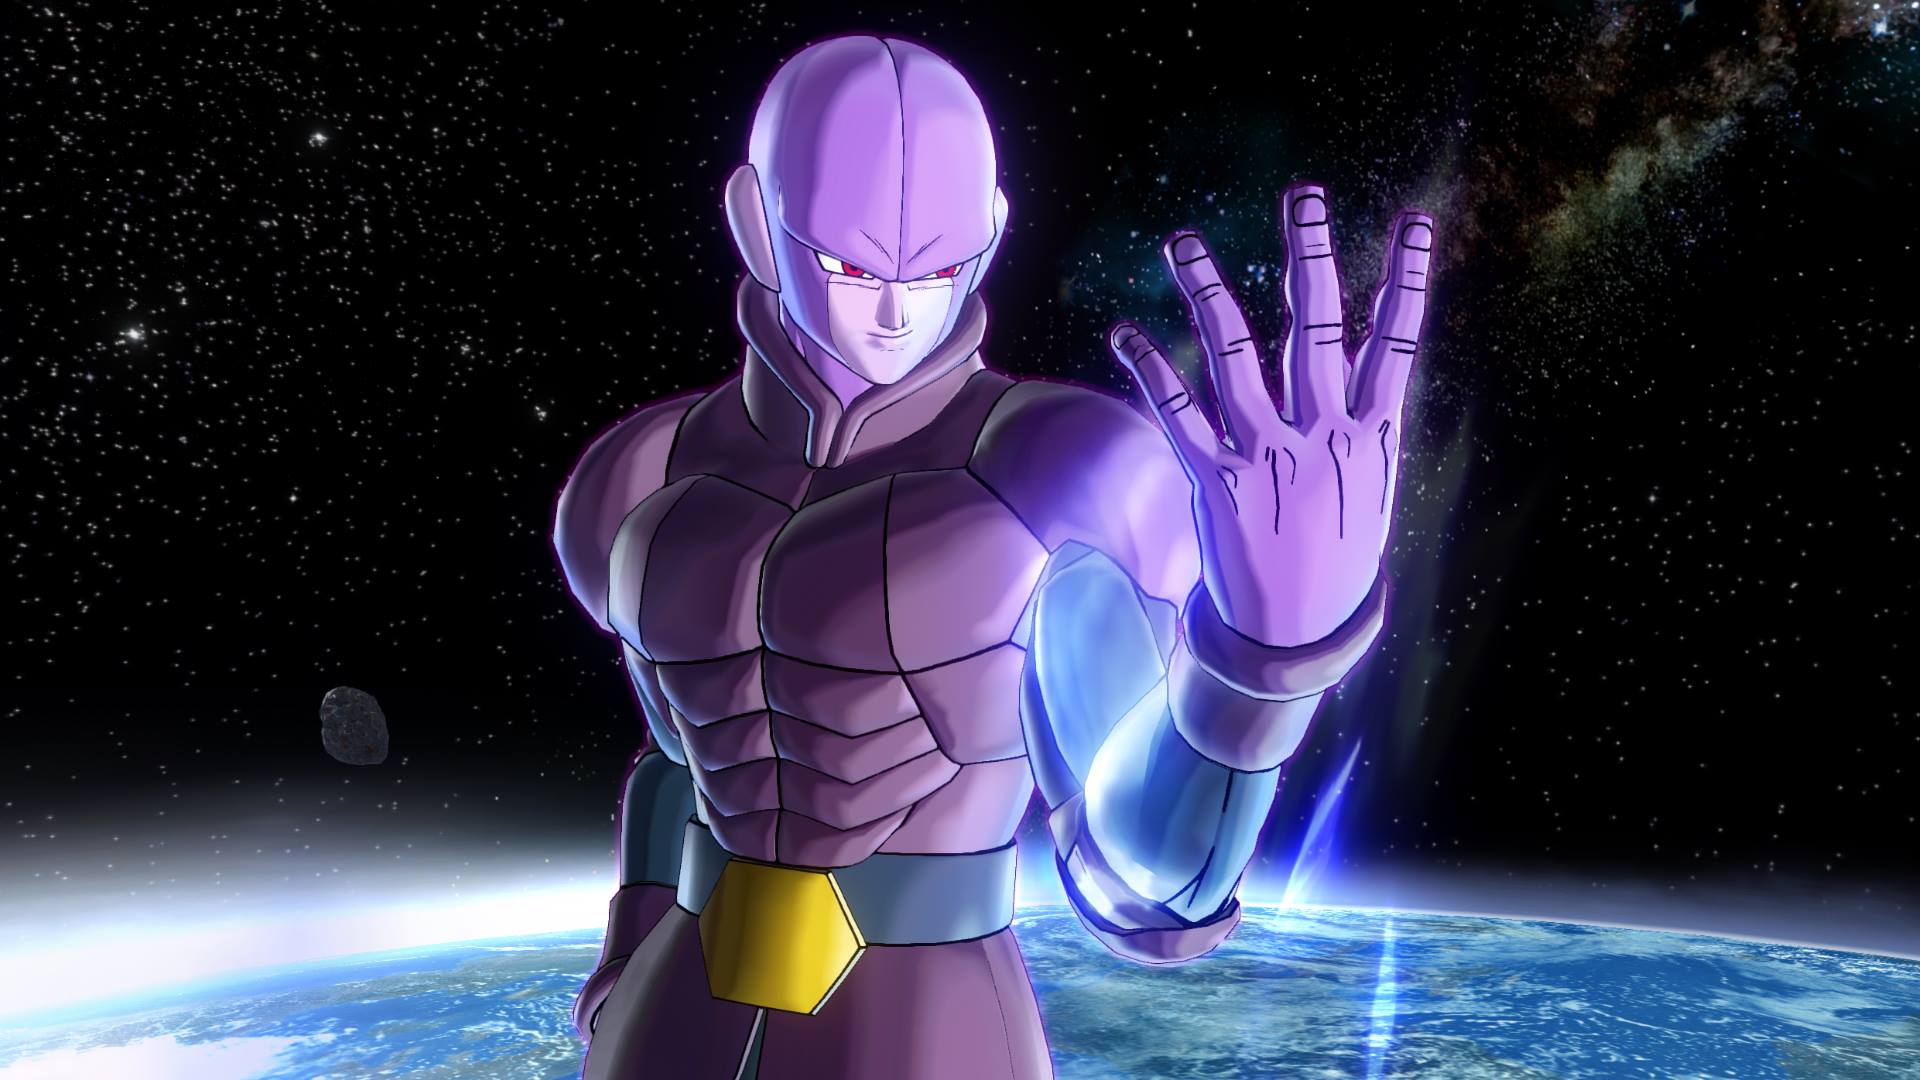 Dragon Ball Xenoverse 2 Full Roster Revealed And New Trailers Capsule